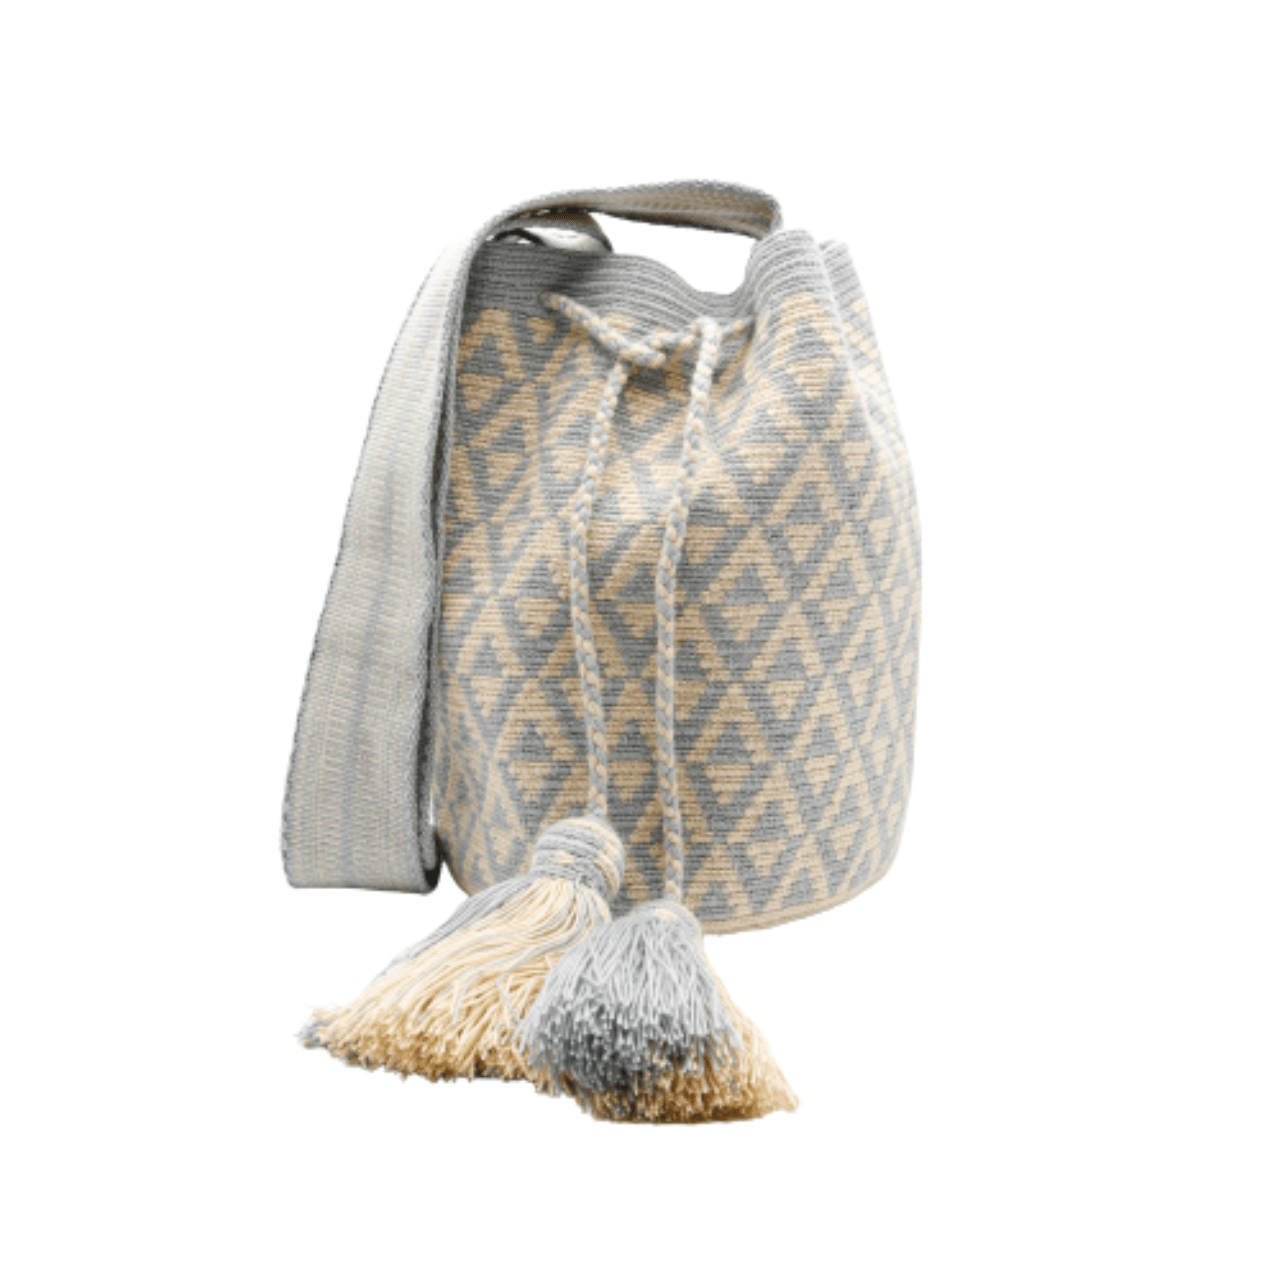 Discover the exquisite Amaia Wayuu Bag from Colombia, a captivating blend of gray and beige. Shop our premium selection of Wayuu bags and bring a touch of Colombian craftsmanship to the world.